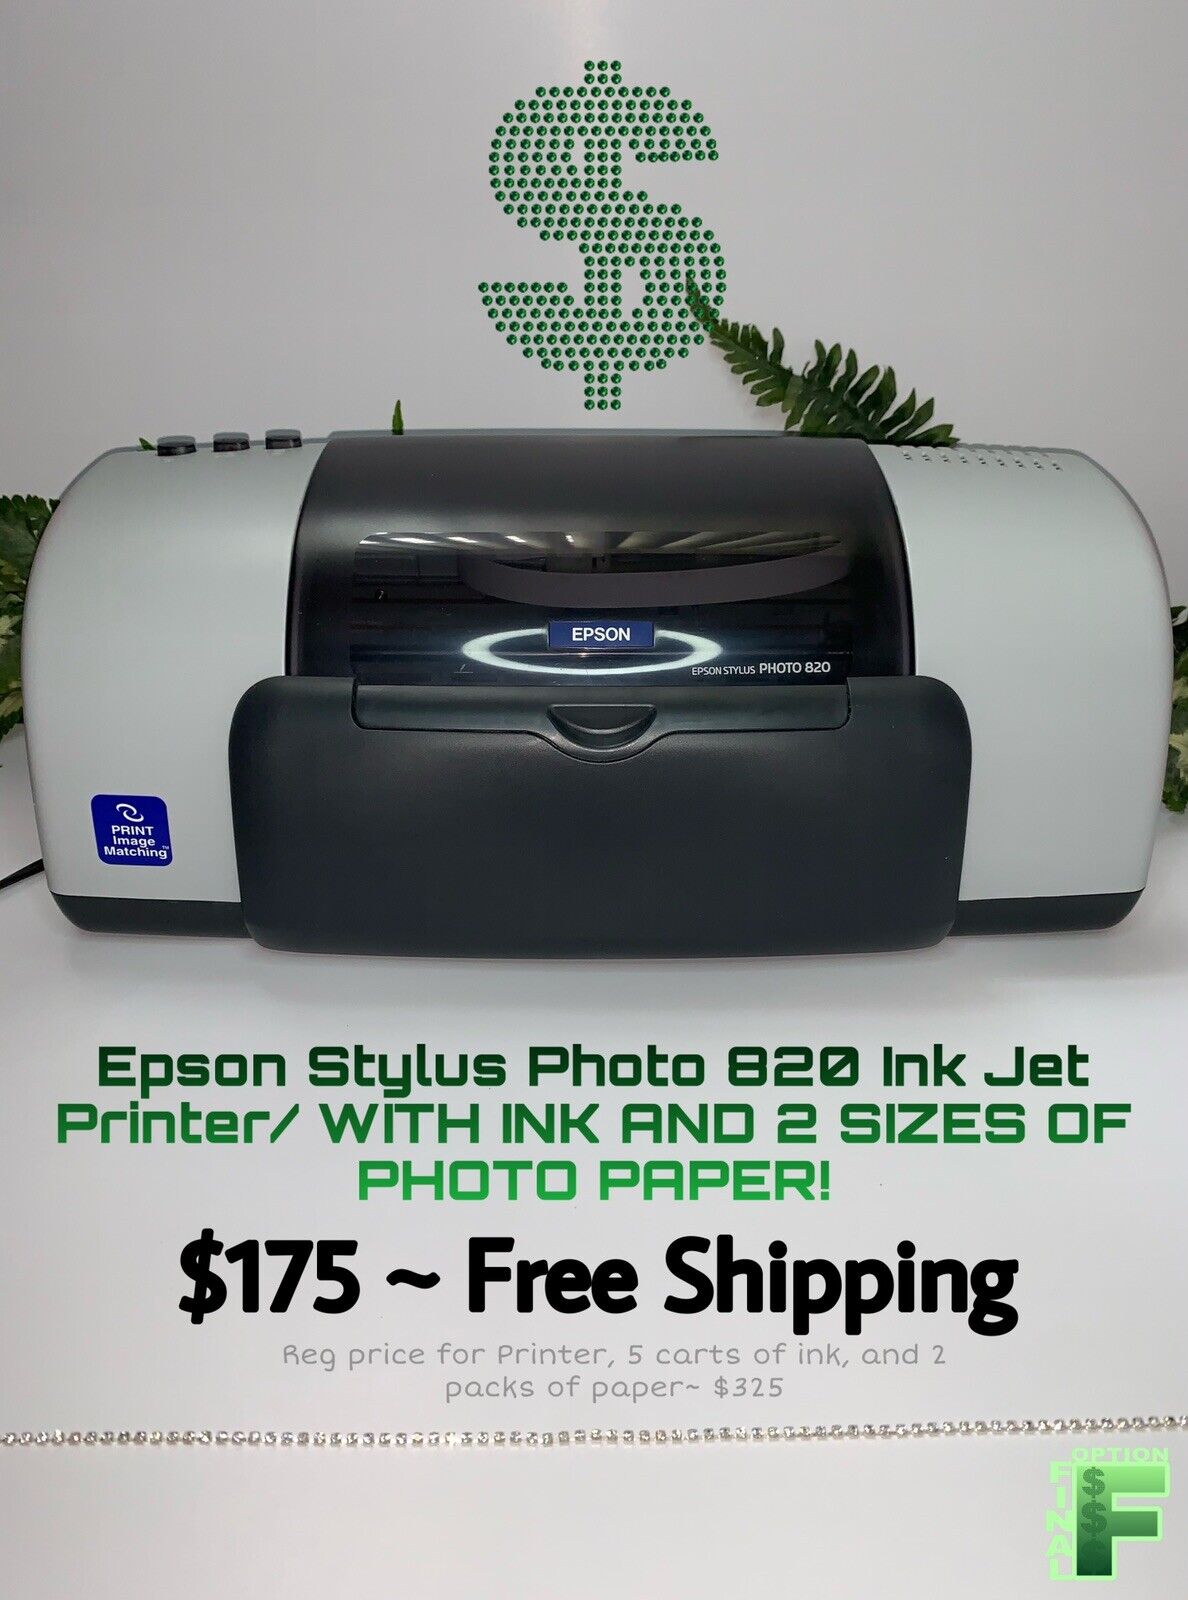 Epson Stylus Photo 820 Ink Jet Printer/ WITH INK AND 2 SIZES OF PHOTO PAPER